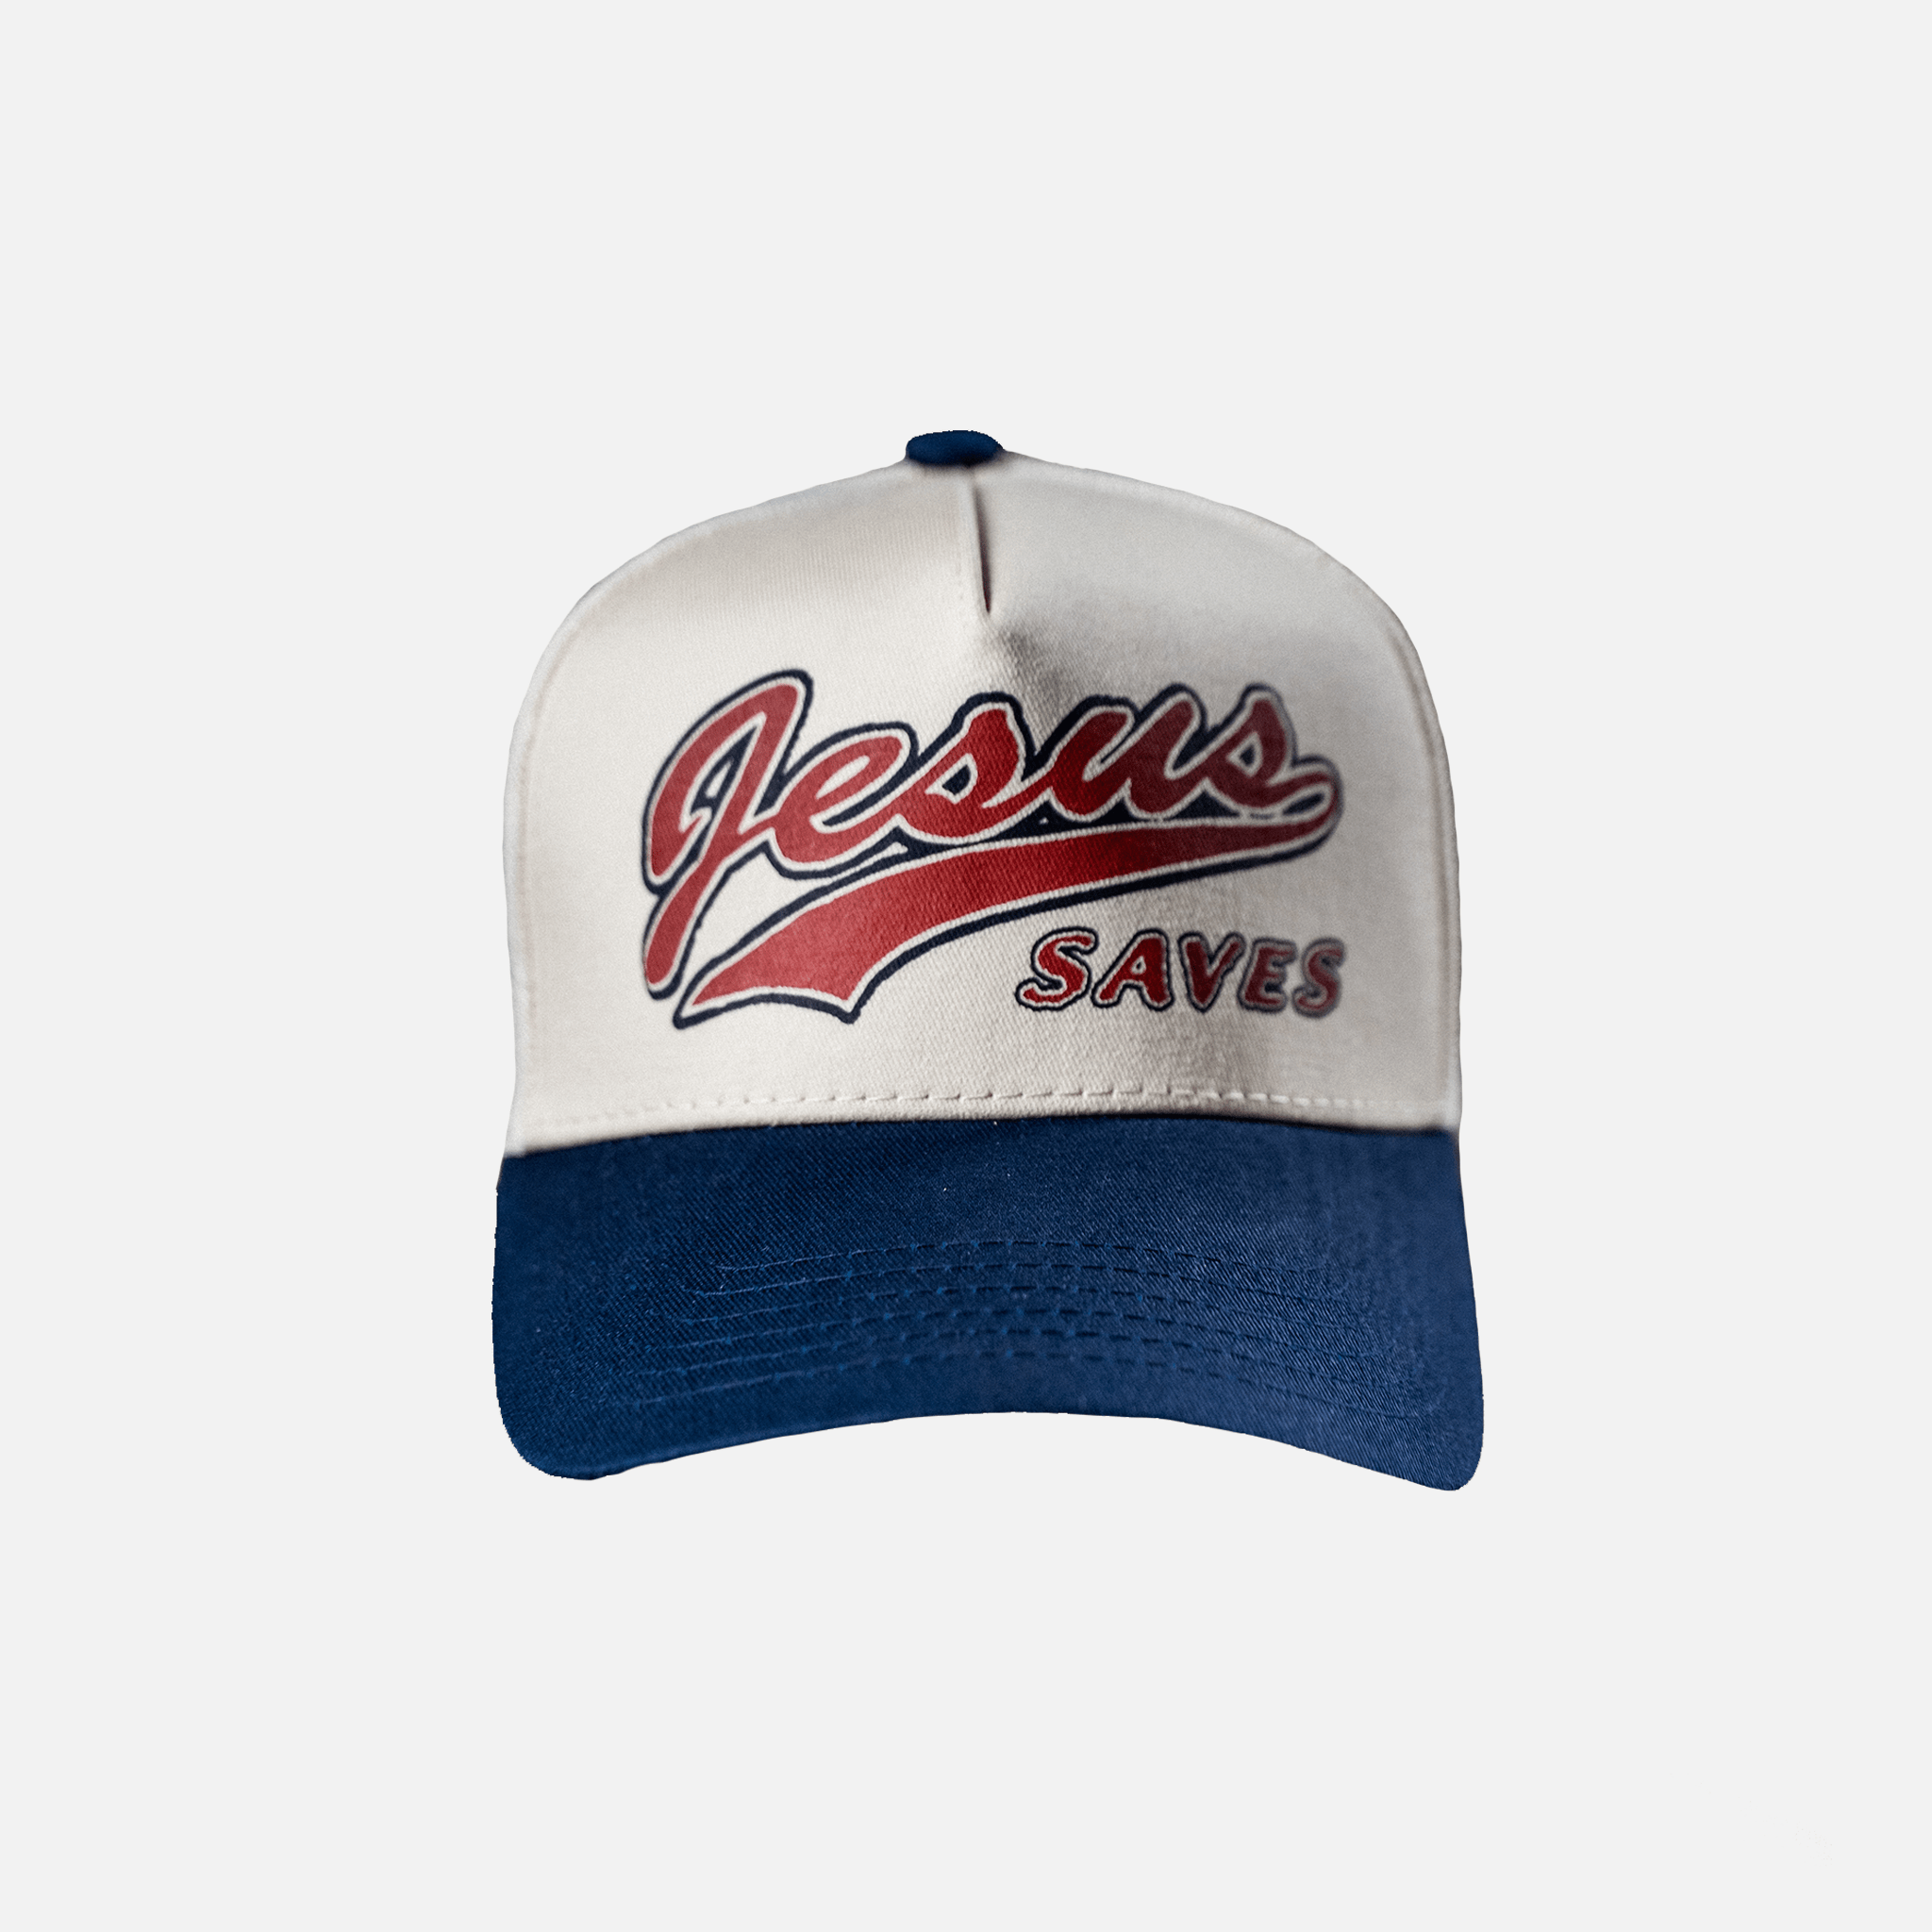 (Now fixed!) get a free trucker hat - God The Father Apparel